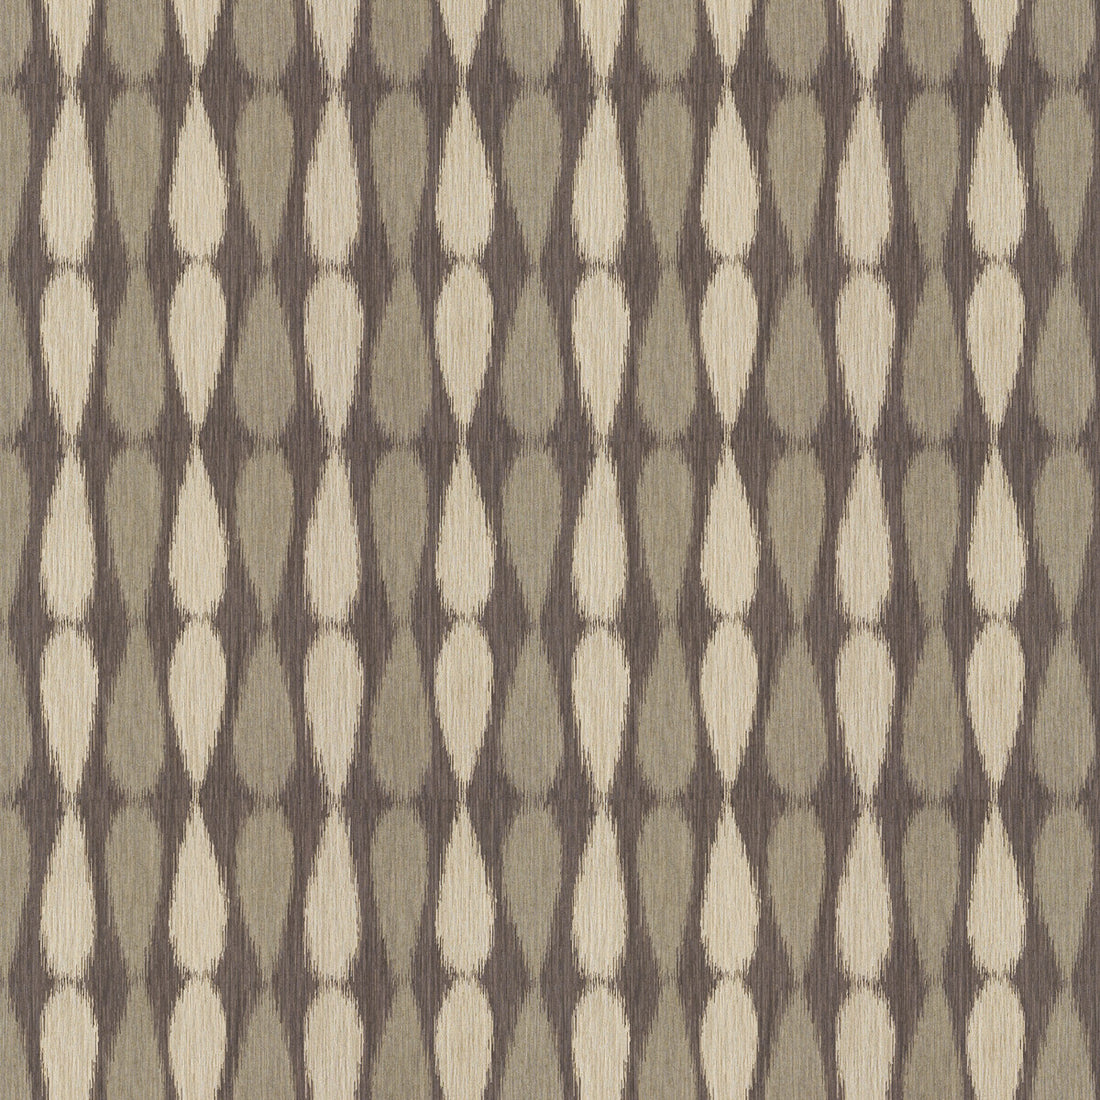 Ikat Drops fabric in natural color - pattern GWF-2927.811.0 - by Lee Jofa Modern in the Allegra Hicks II collection